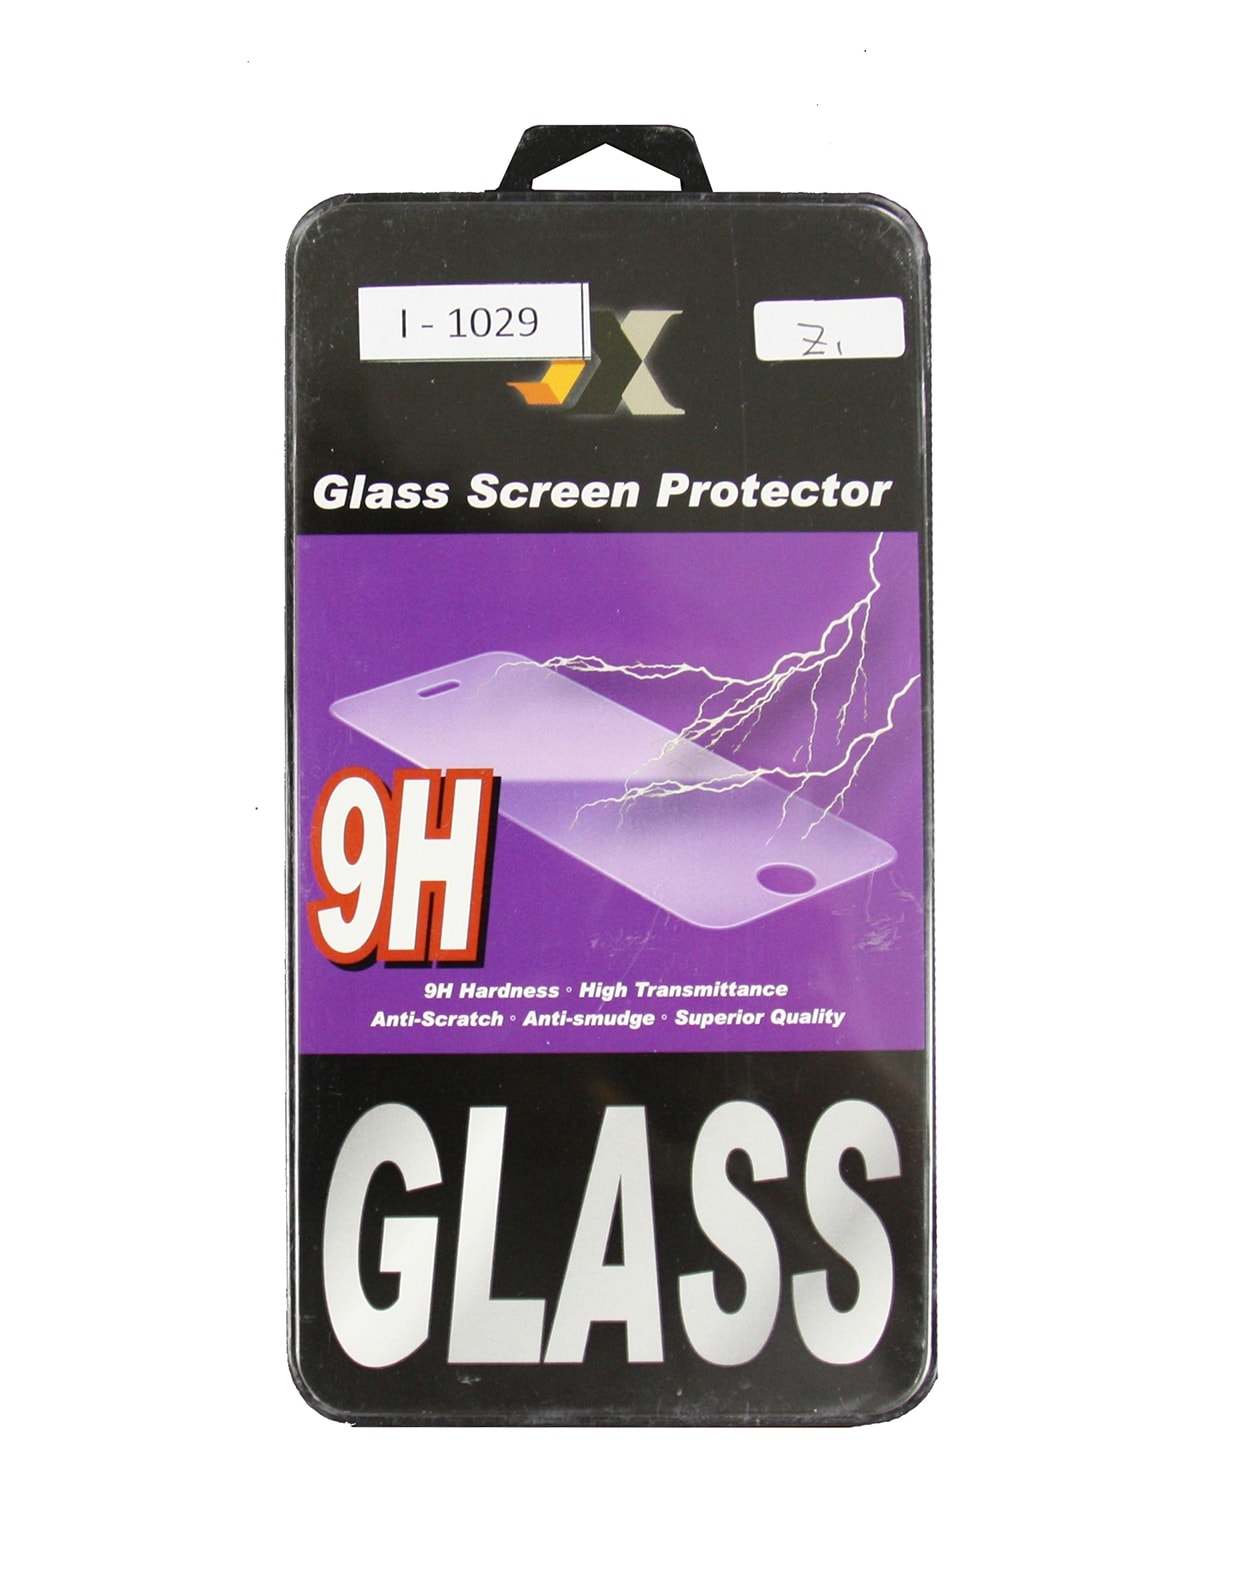 Sony-Z1 Glass Screen Protector - Bubble Free & Sensitive Touch - Improved LCD Protection Film | - ORE International I-1029